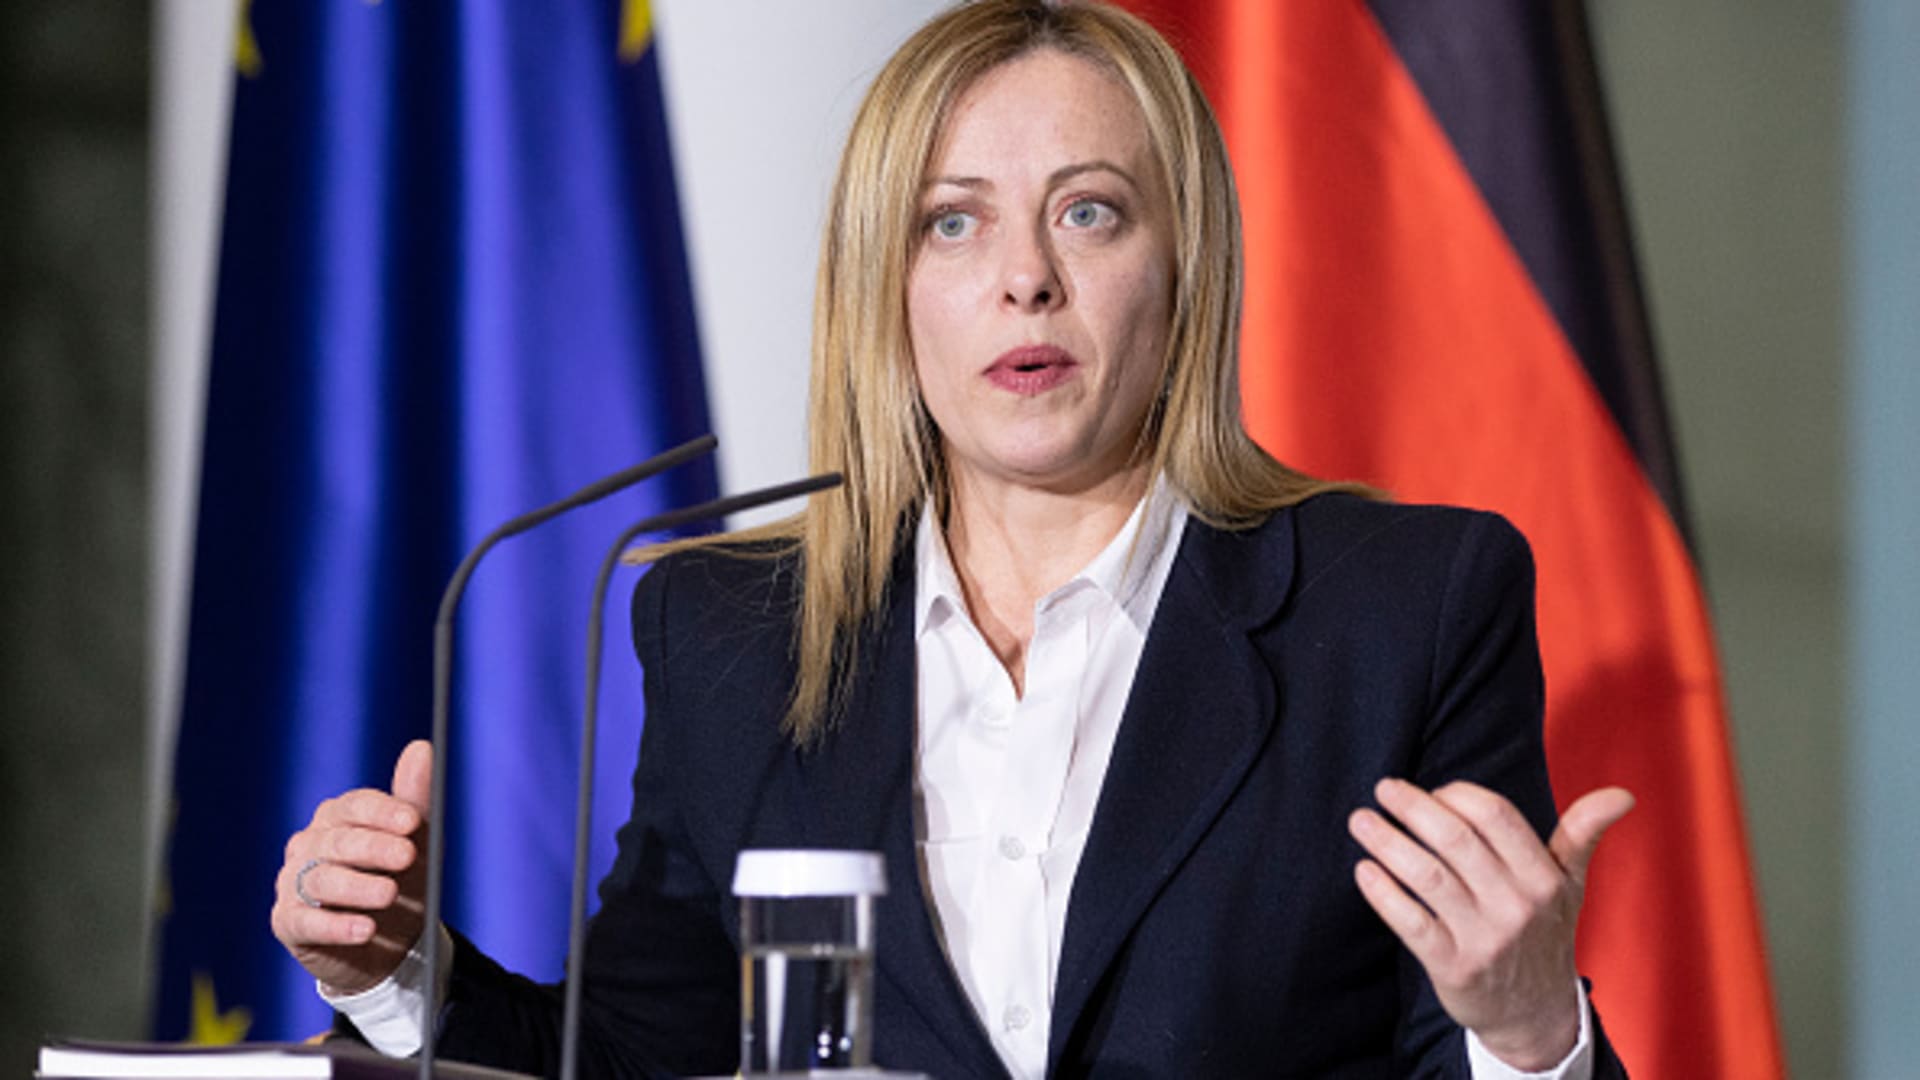 Italian Prime Minister Giorgia Meloni speaks during a press conference in Berlin, Germany.